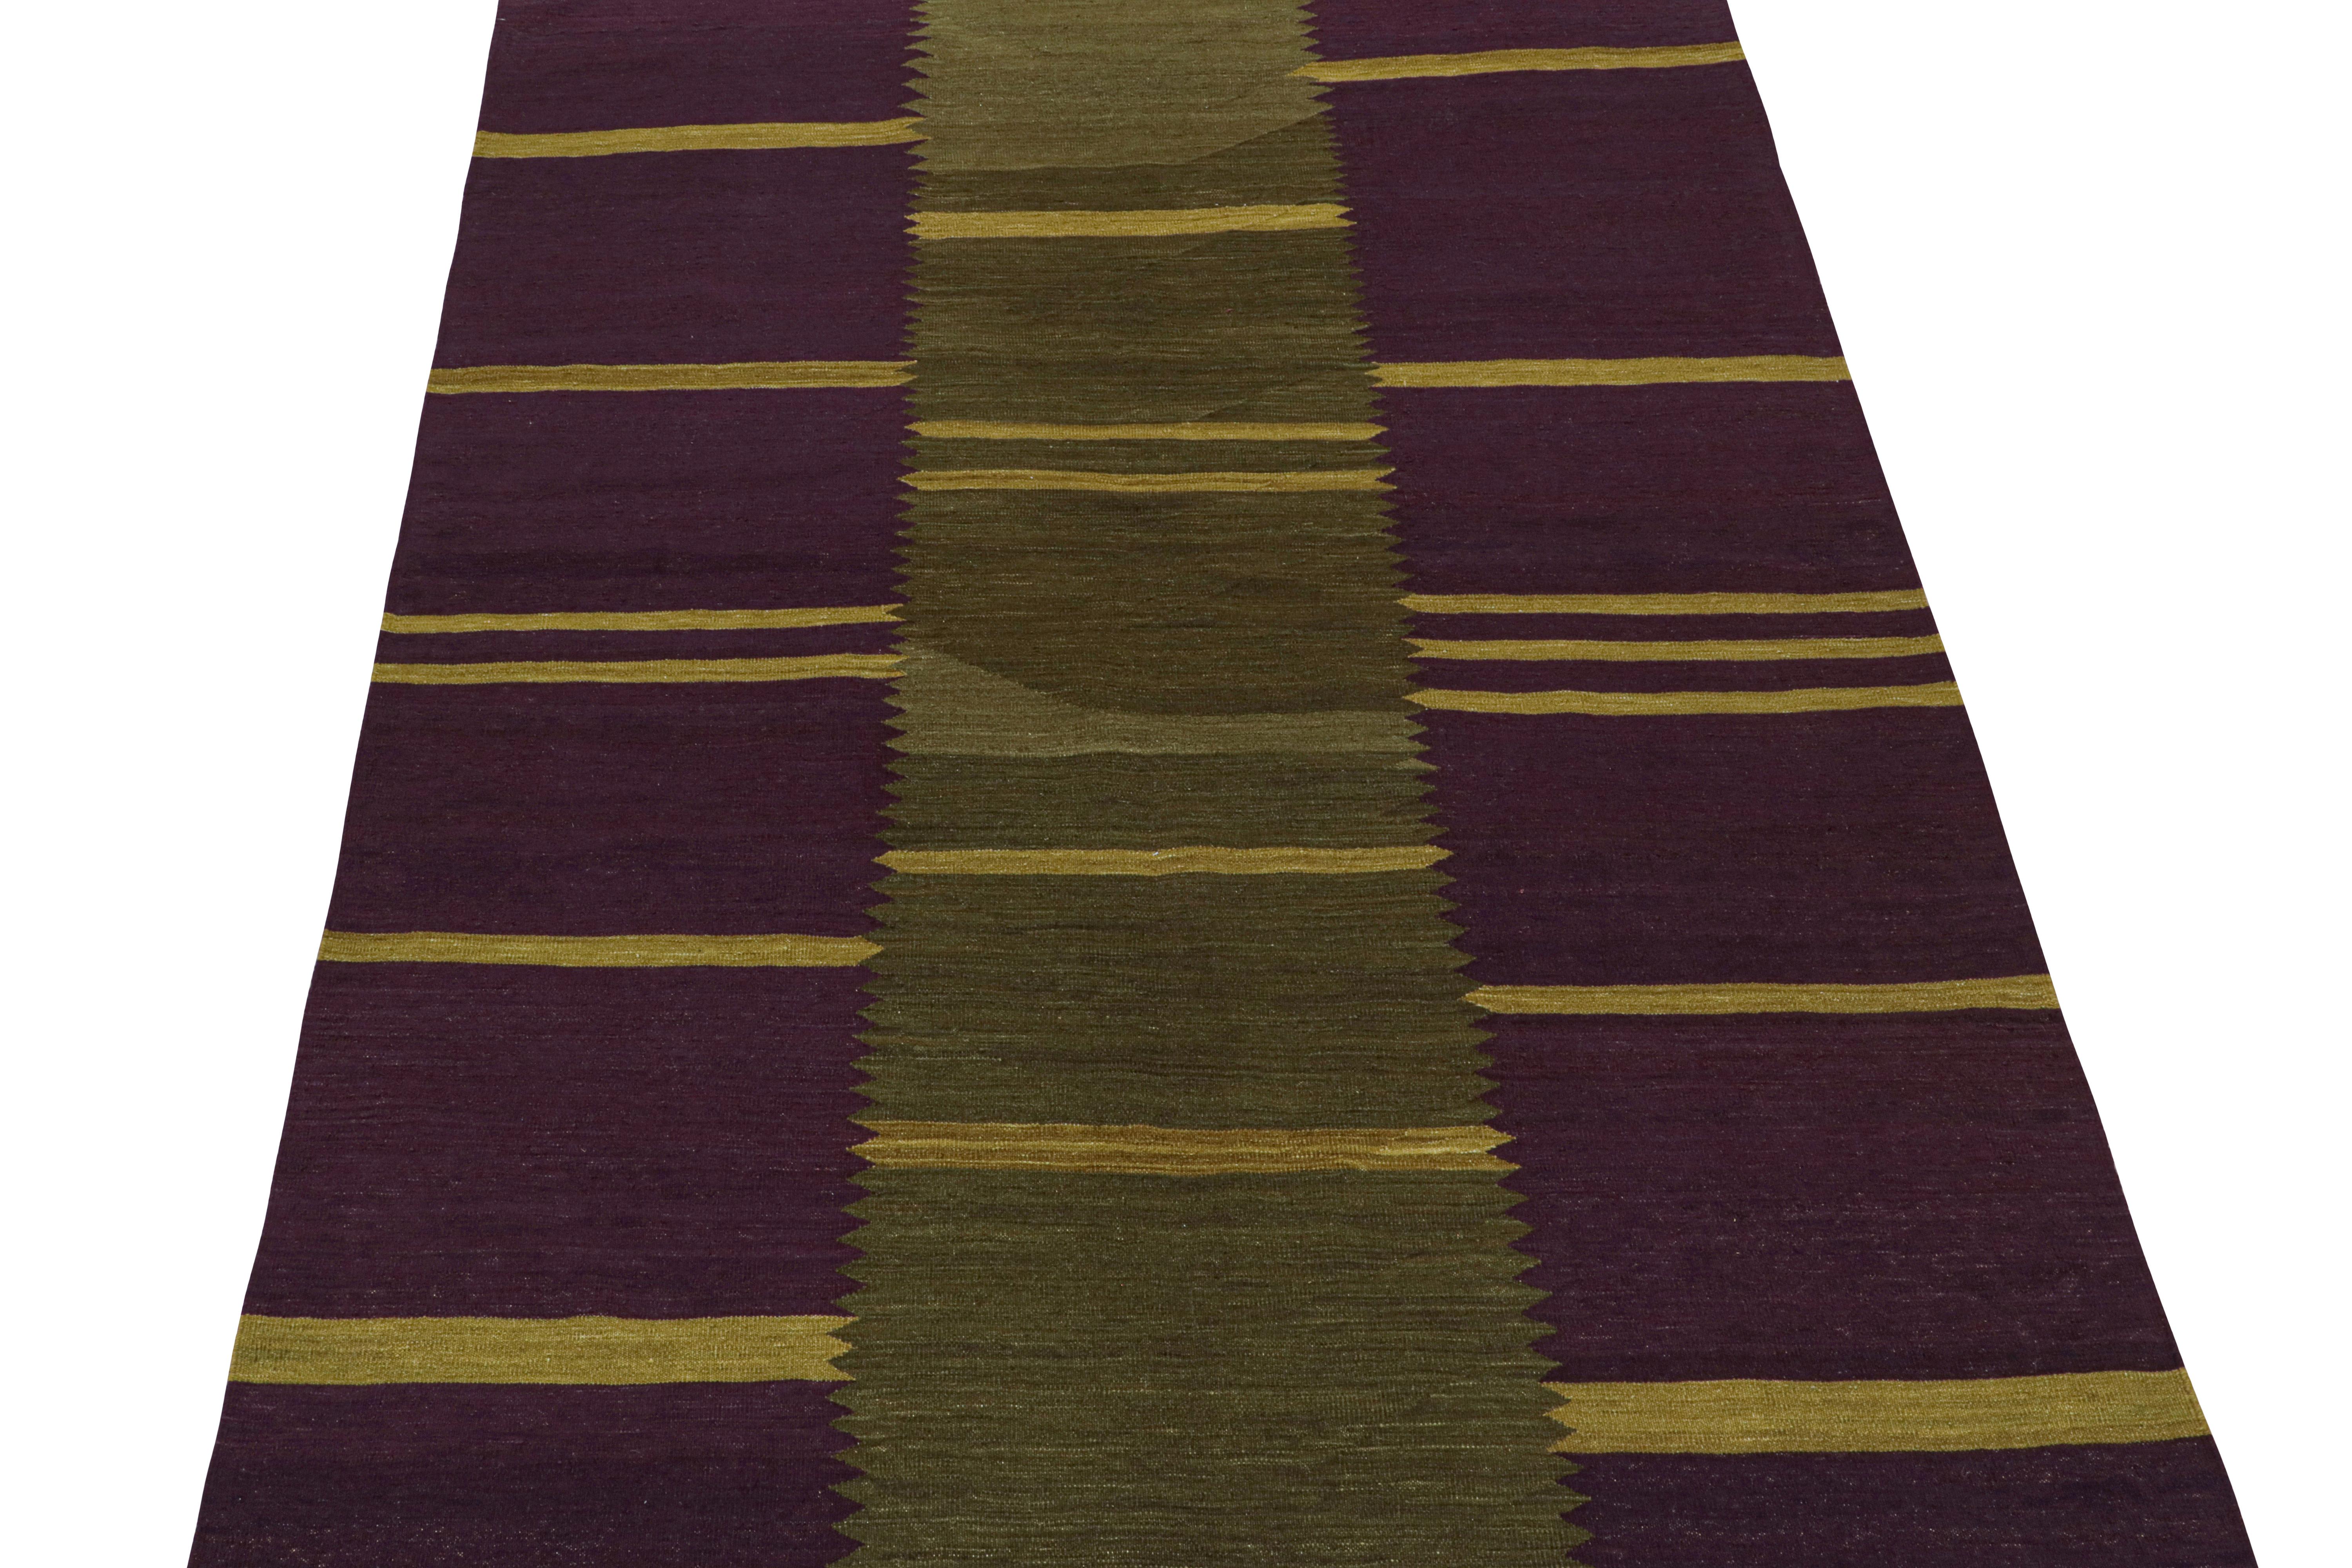 This contemporary 7x10 kilim rug is from an exciting new collection in Rug & Kilim's modern flat weaves. 

On the Design: 

Handwoven in wool, this new style of our “Rez” Collection enjoys an almost abstract minimalist sensibility in its design. The